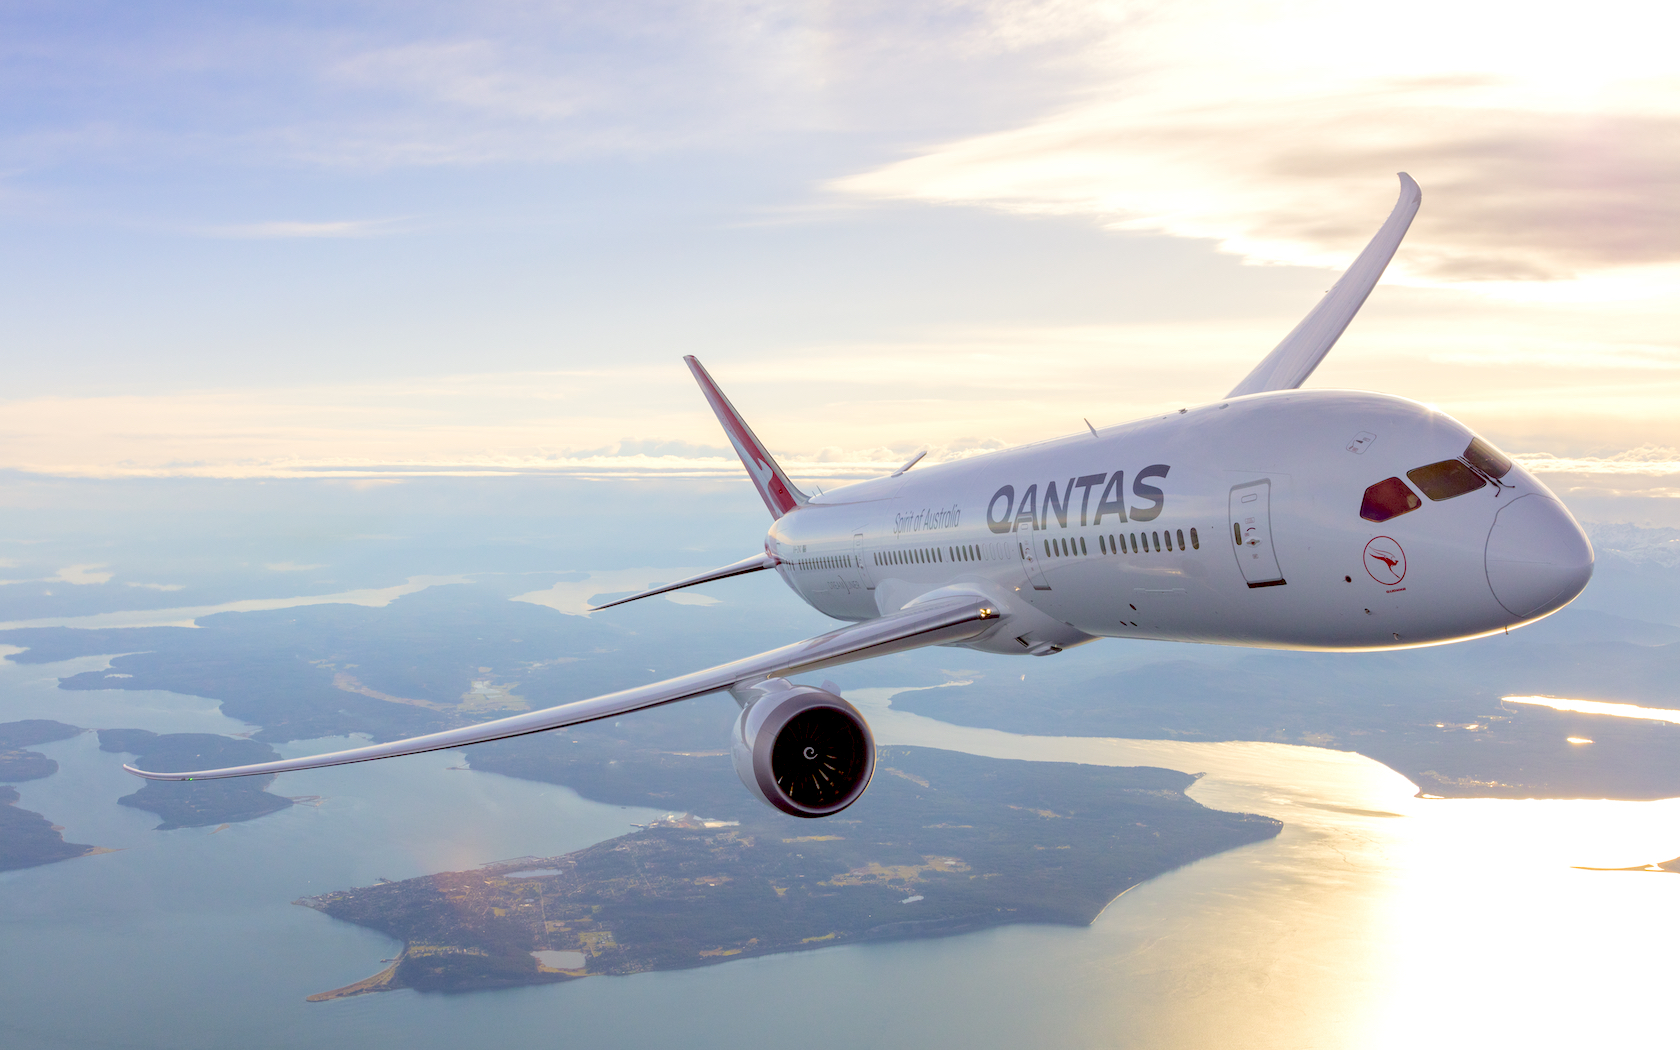 Sydney To Santiago: Qantas Is Launching Daily Direct Dreamliner Flights